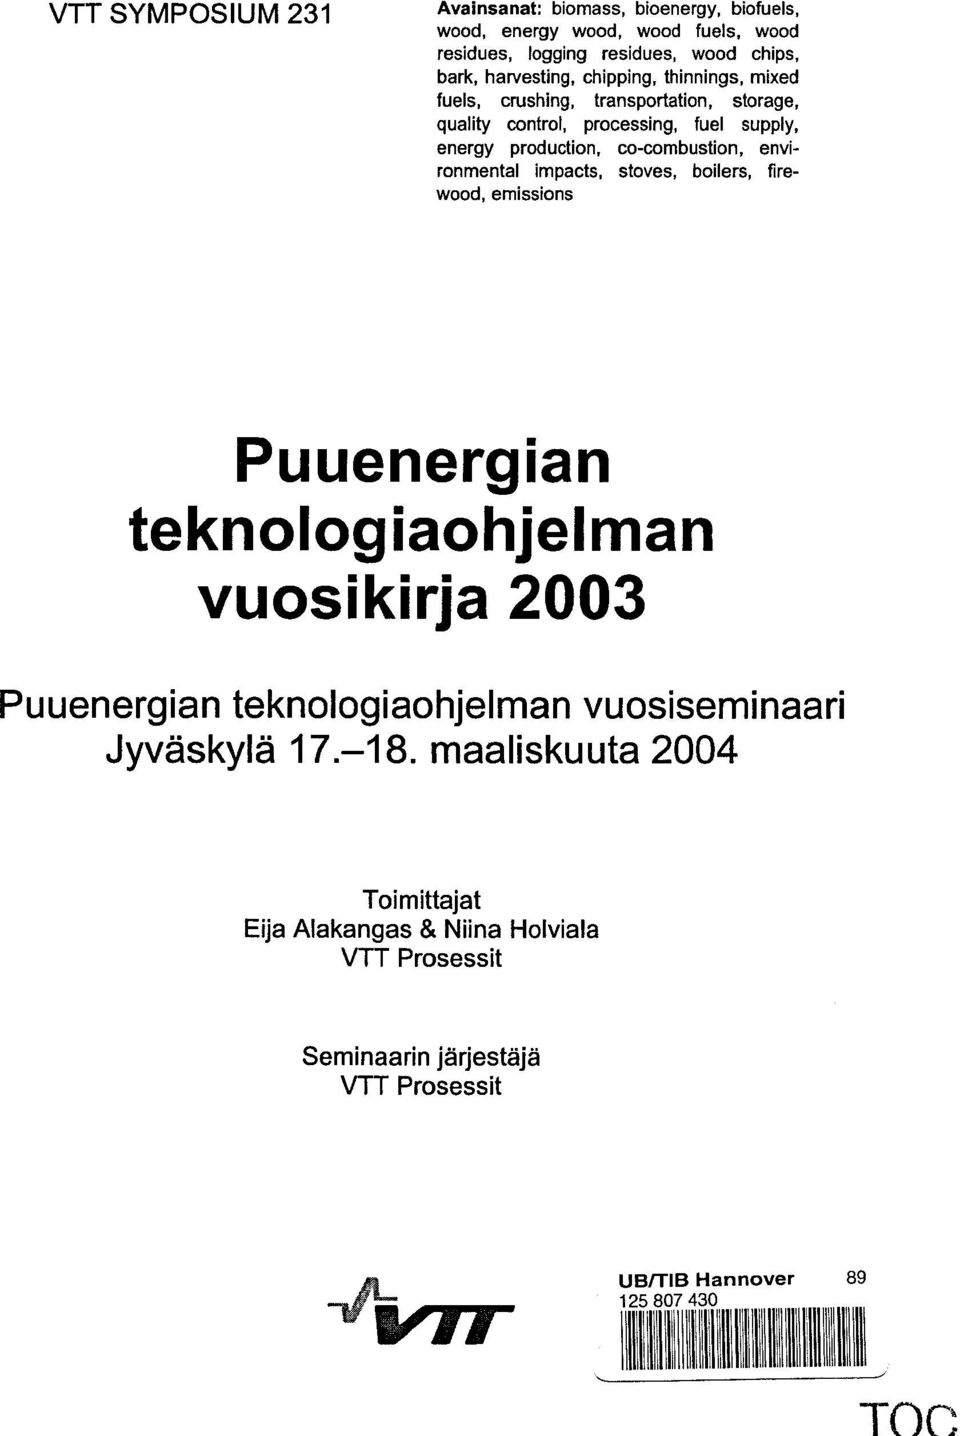 co-combustion, environmental impacts, stoves, boilers, firewood, emissions Puuenergian teknologiaohjelman vuosikirja 2003 Puuenergian teknologiaohjelman